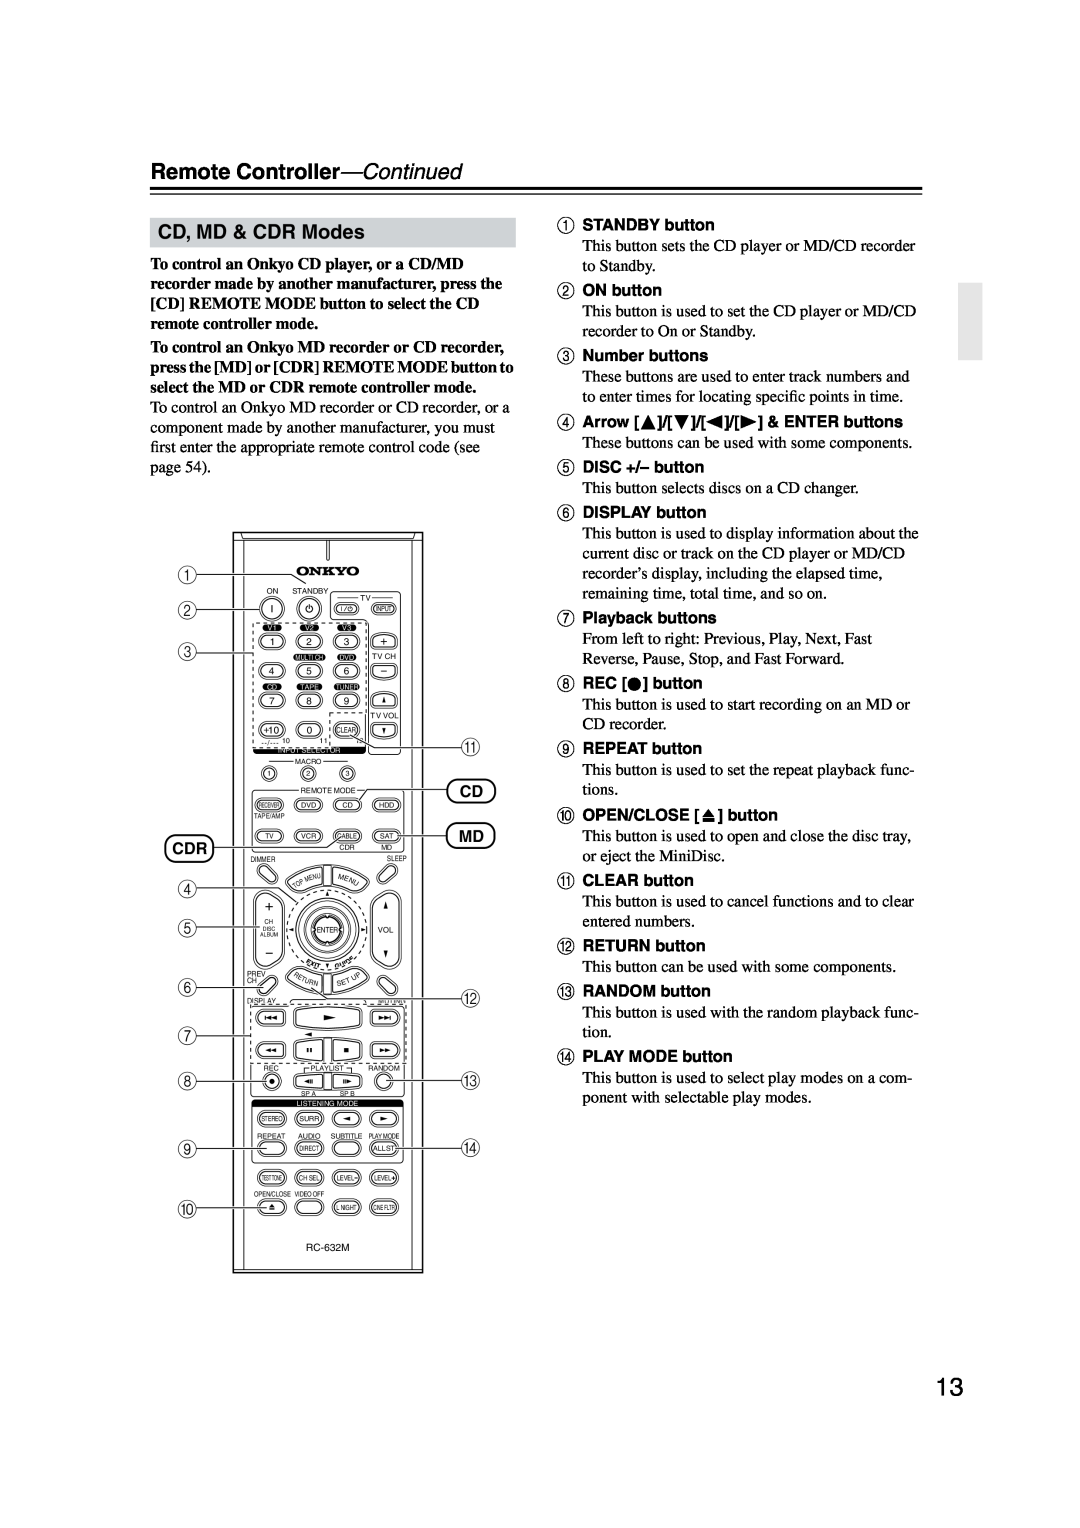 Onkyo TX-SR573 instruction manual CD, MD & CDR Modes, Remote Controller—Continued 